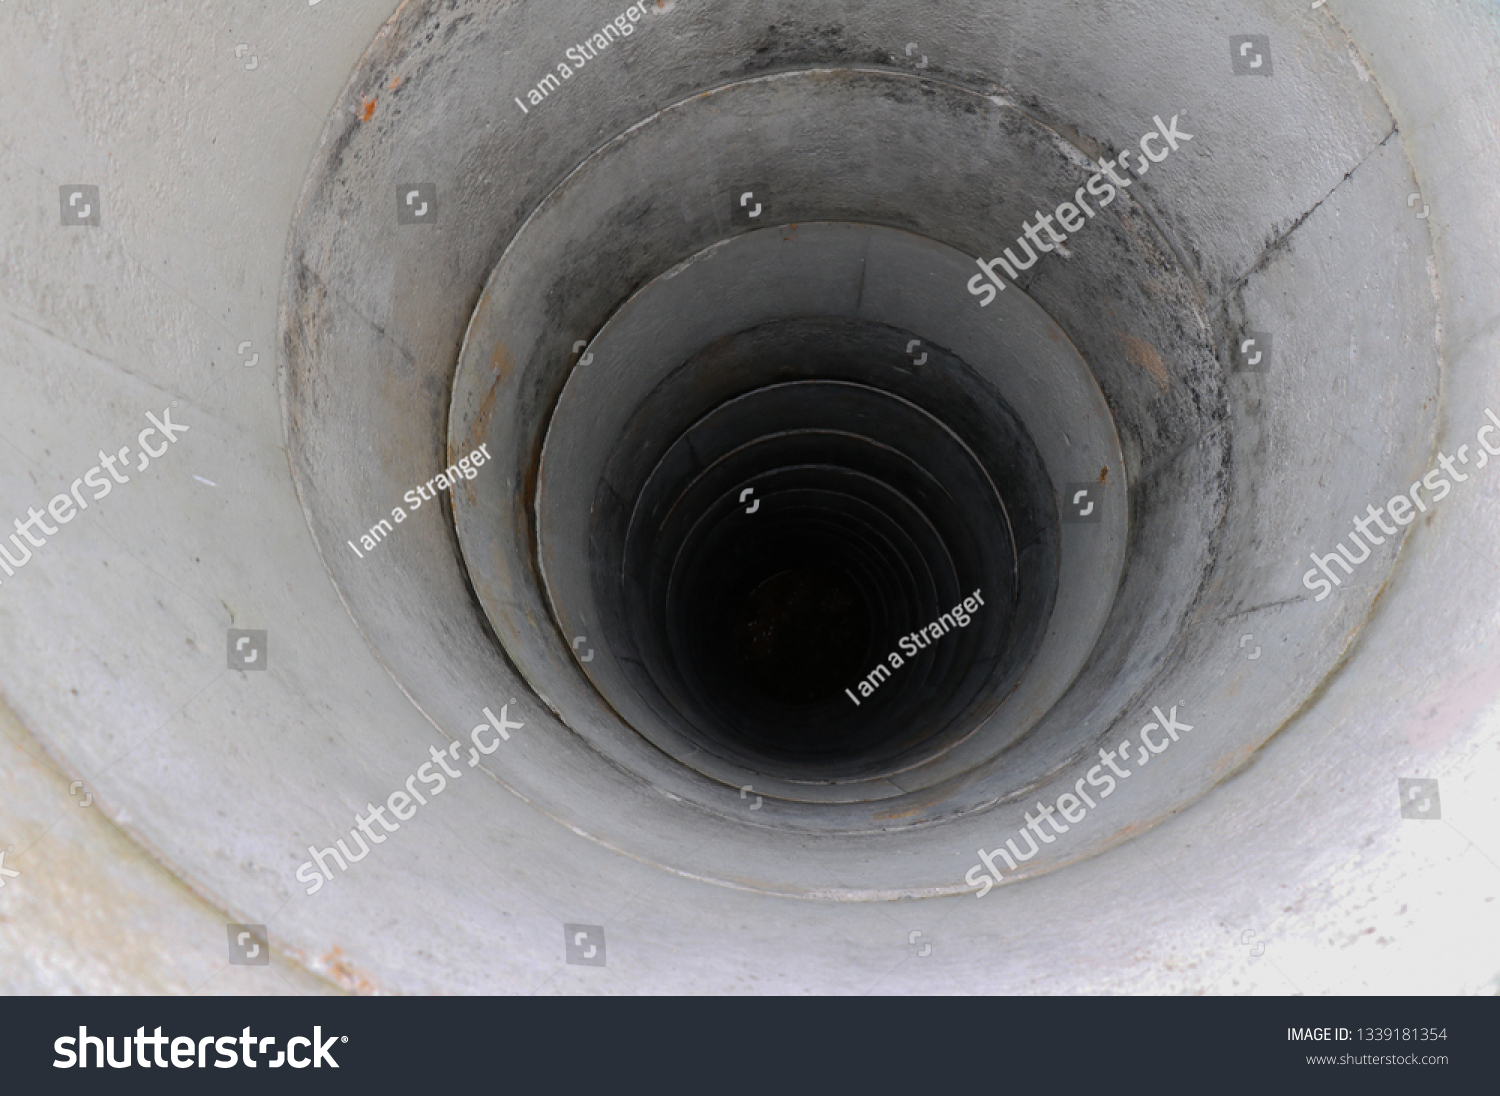 Groundwater well, Dig a well for water, Deep water well, Inside The Well #1339181354